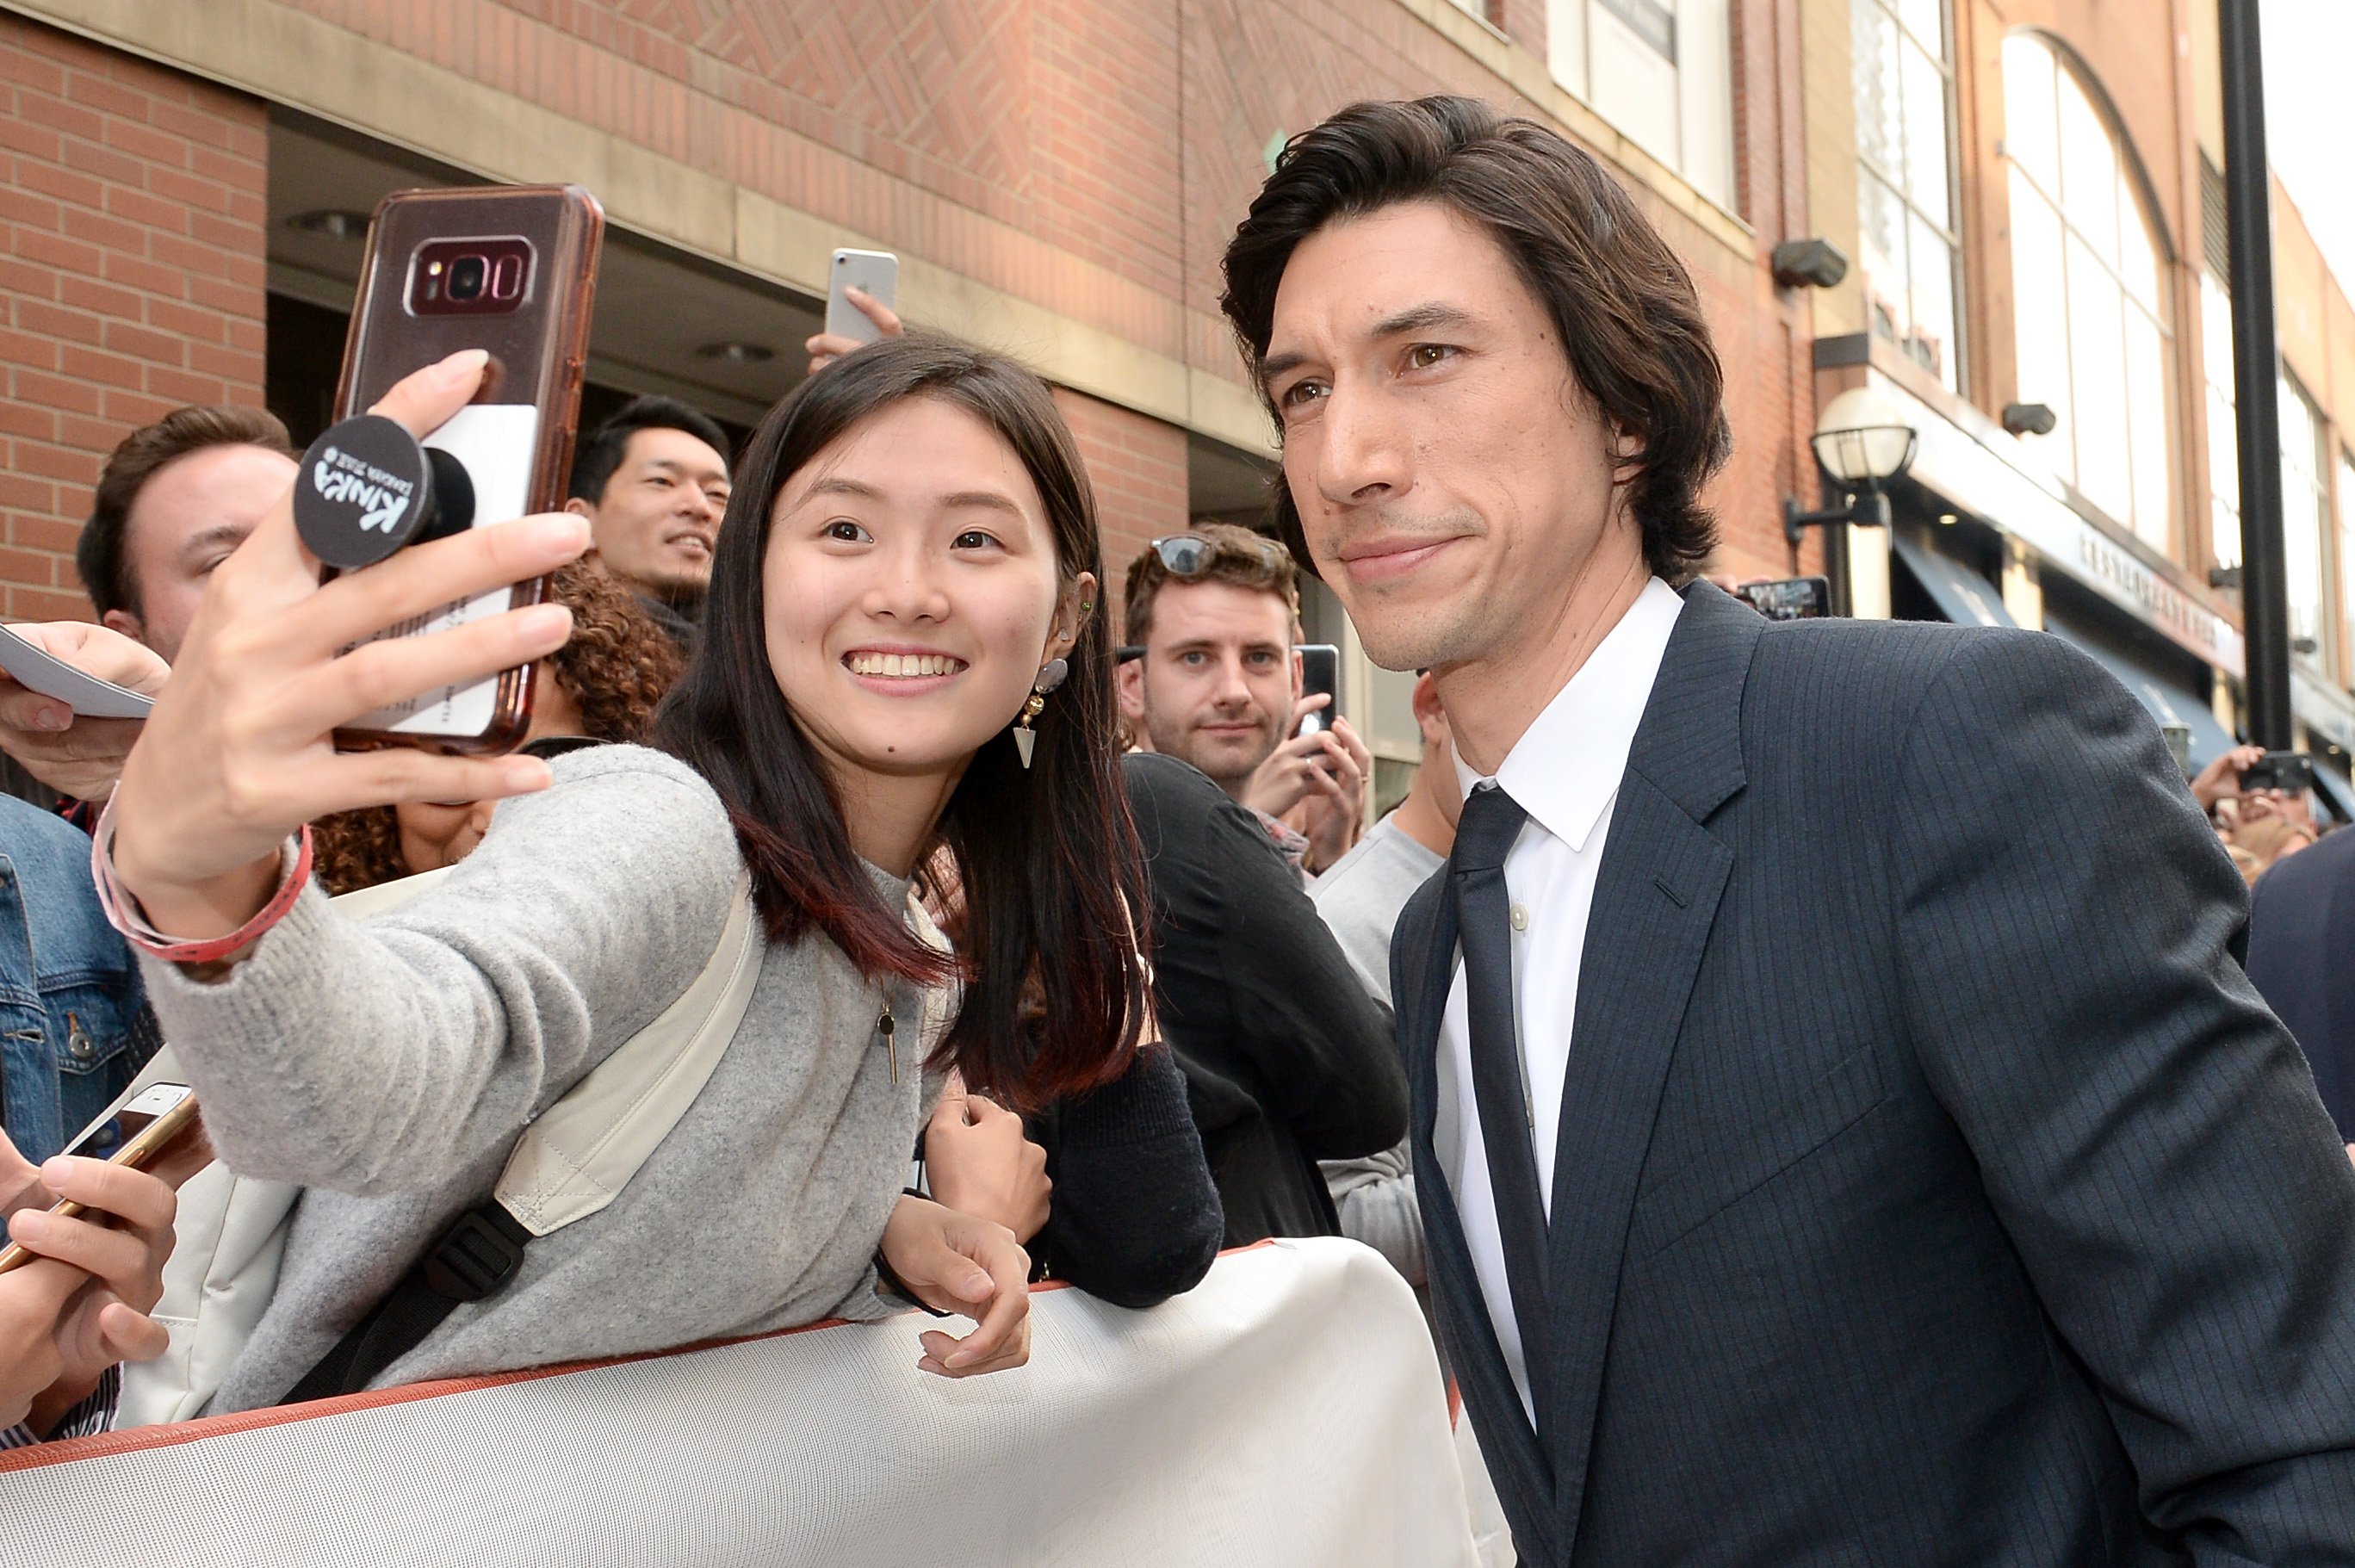 Adam Driver poses for a picture with a fan